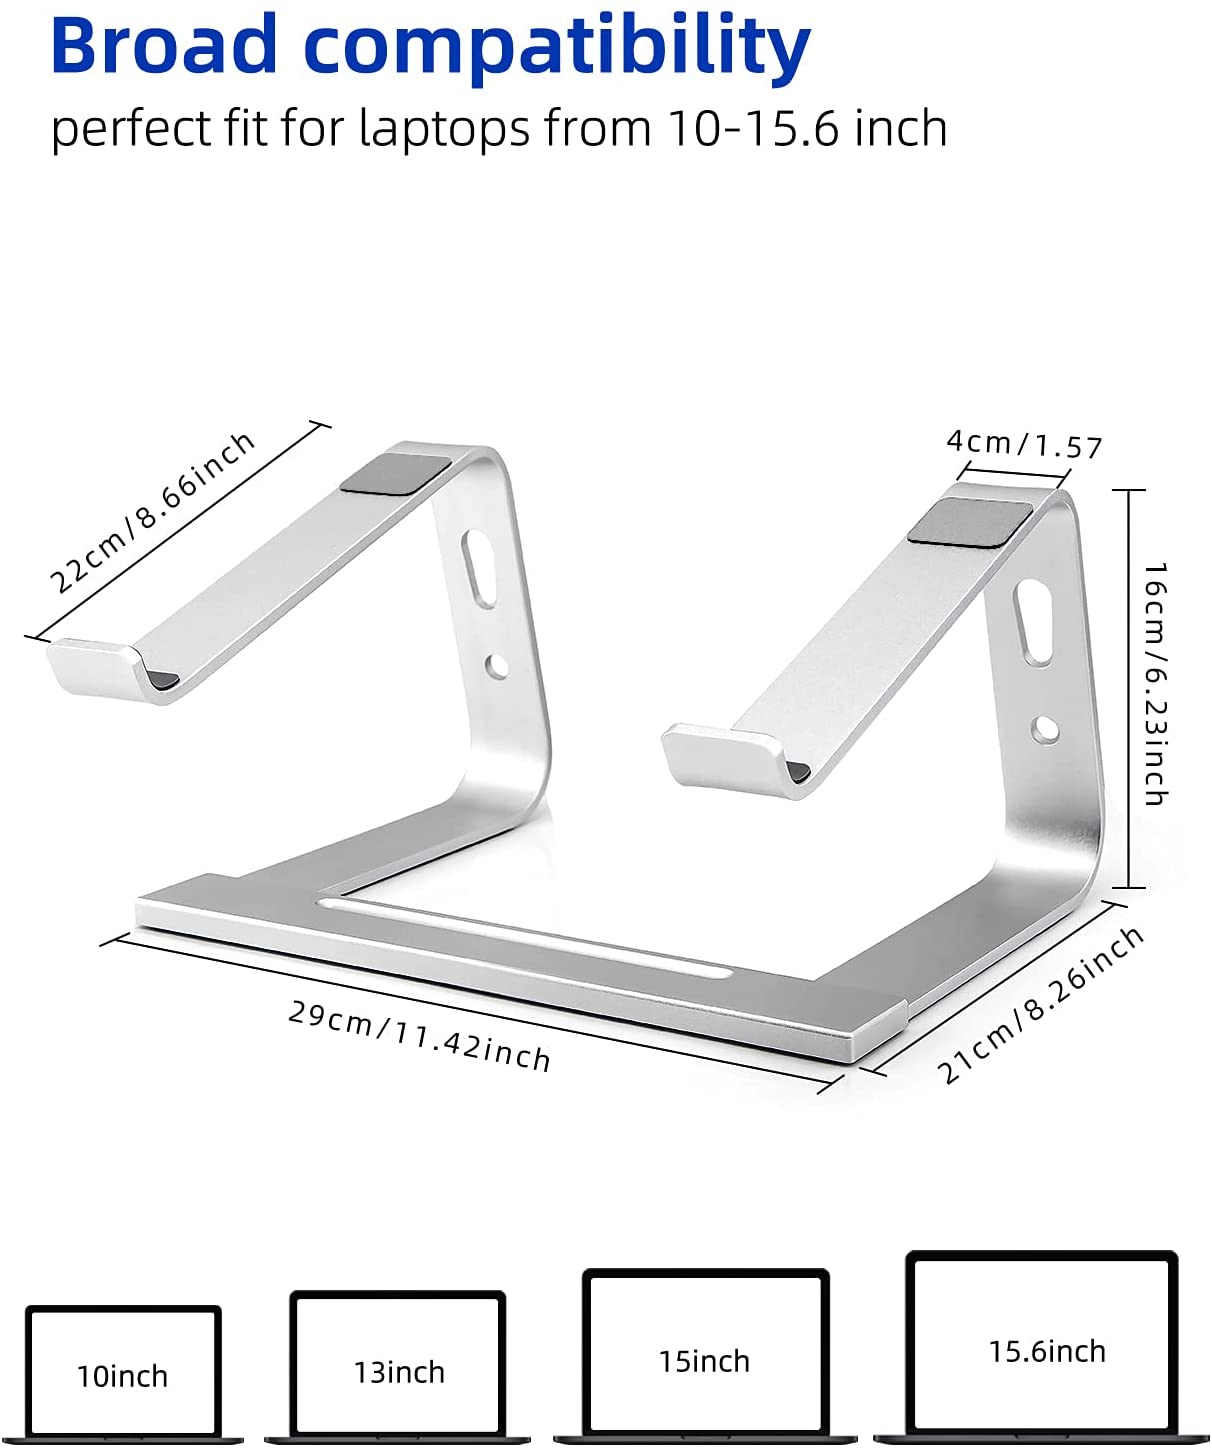 Stand for Laptop, Aluminium Stand Laptop Riser, Ergonomic Laptop Holder Compatible with MacBook Air Pro, Dell XPS, More 10-17 Inch Laptops Work from Home, Amazon Platform Banned